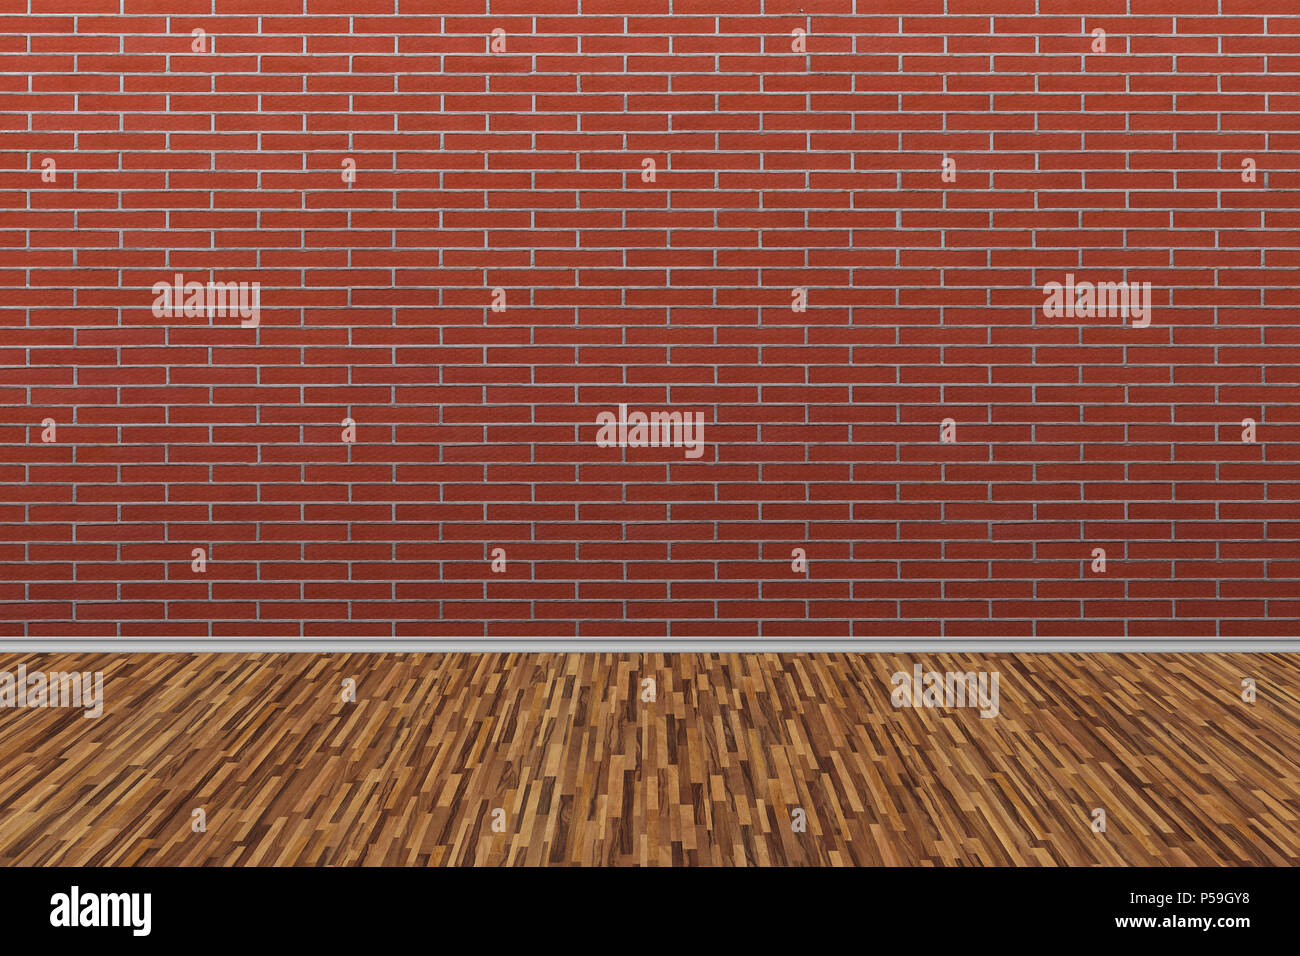 Old brick wall with old wooden floor. Old Room Background. Stock Photo